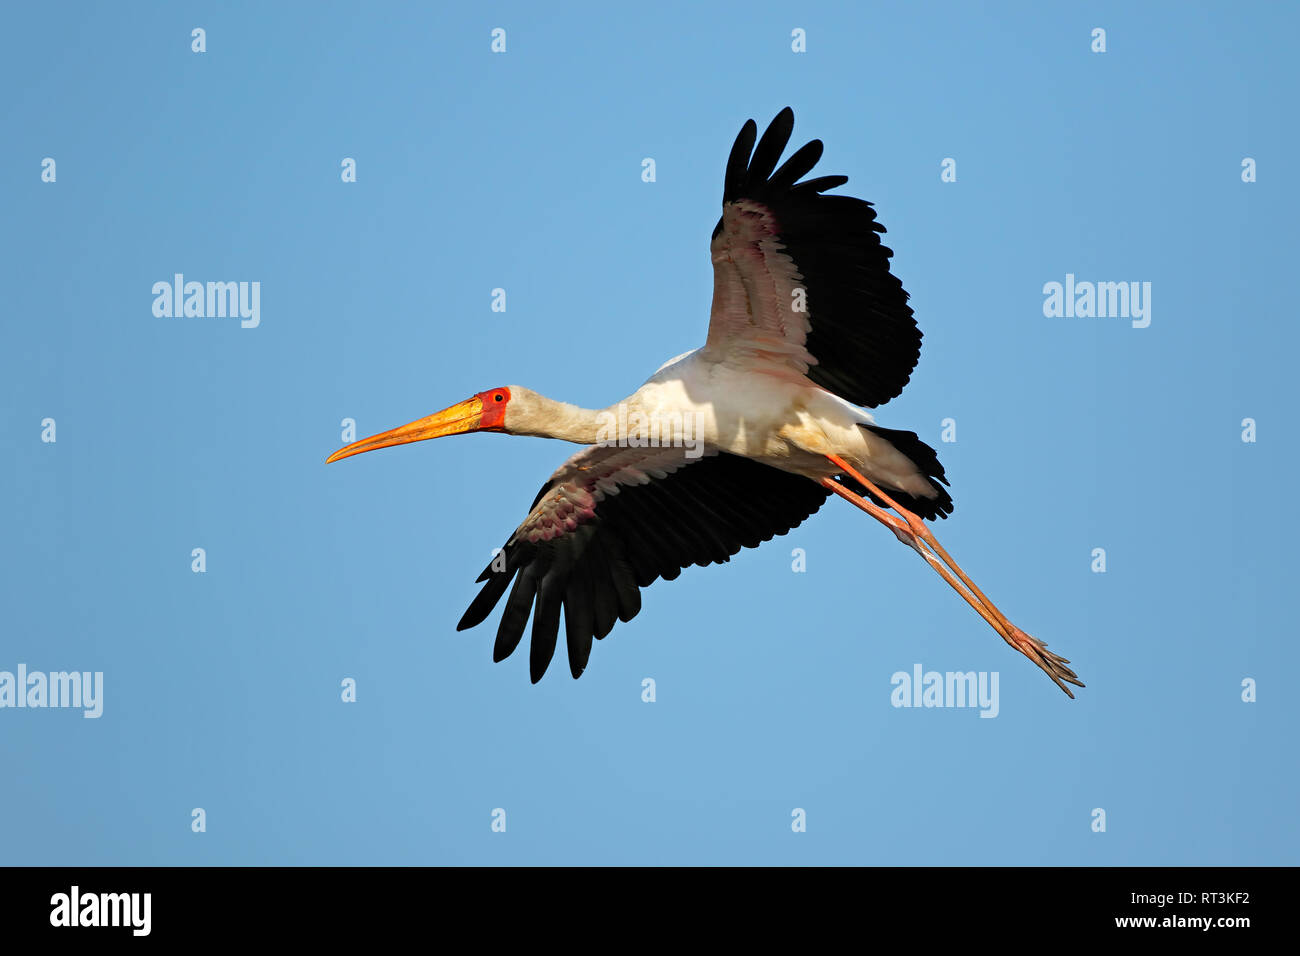 Yellow-billed stork (Mycteria ibis) in flight, Kruger National Park, South Africa Stock Photo